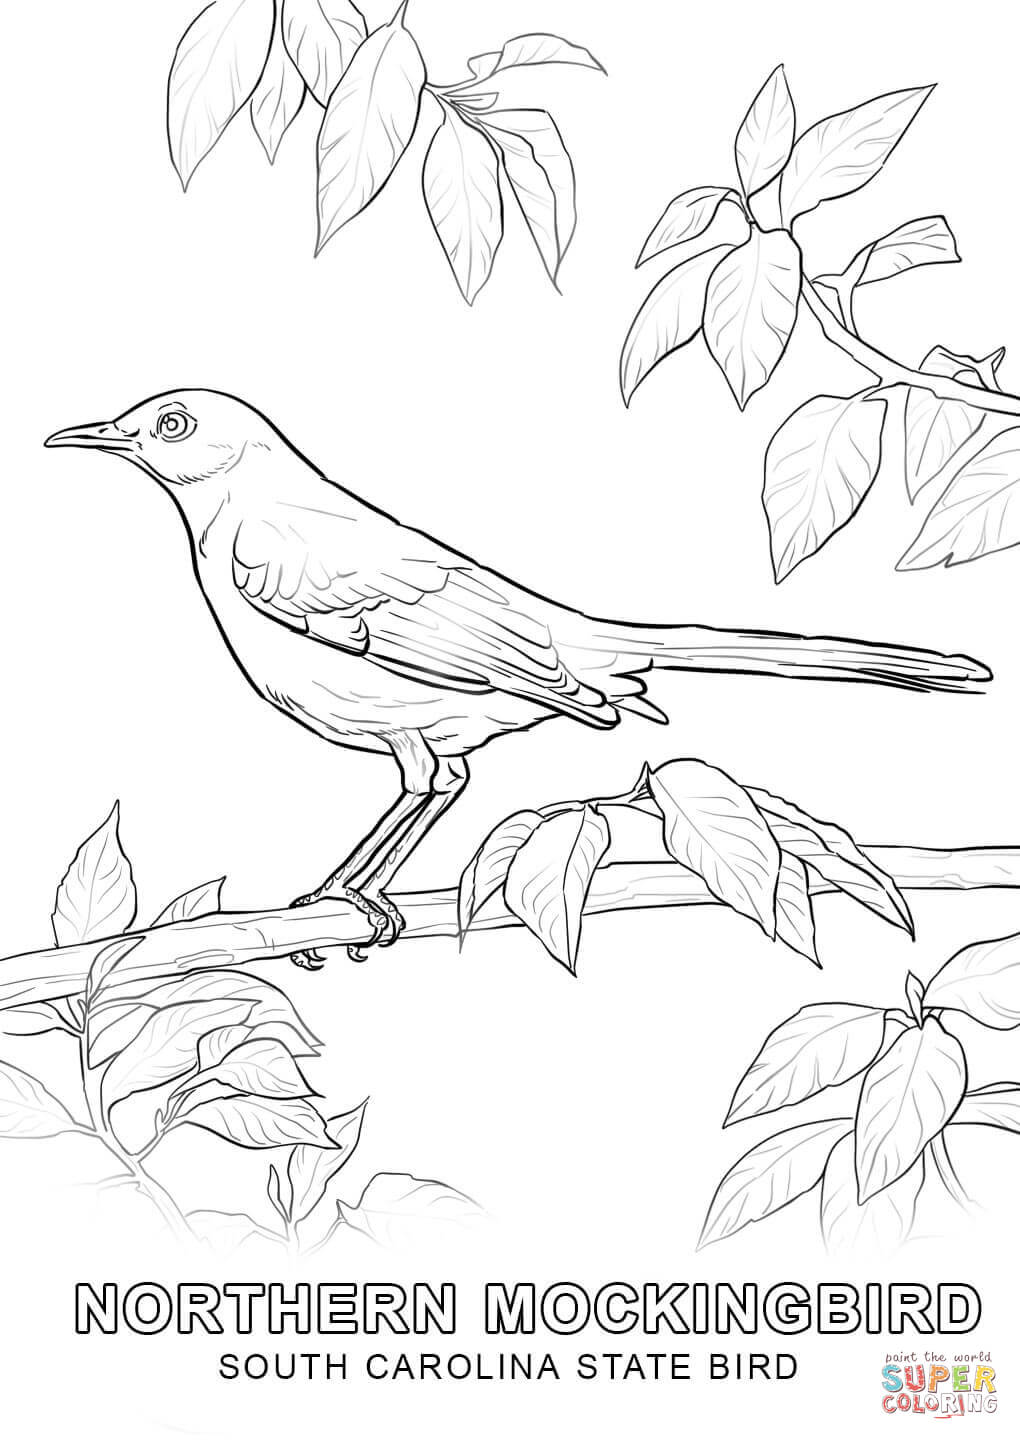 South Carolina State Bird coloring page | Free Printable Coloring Pages